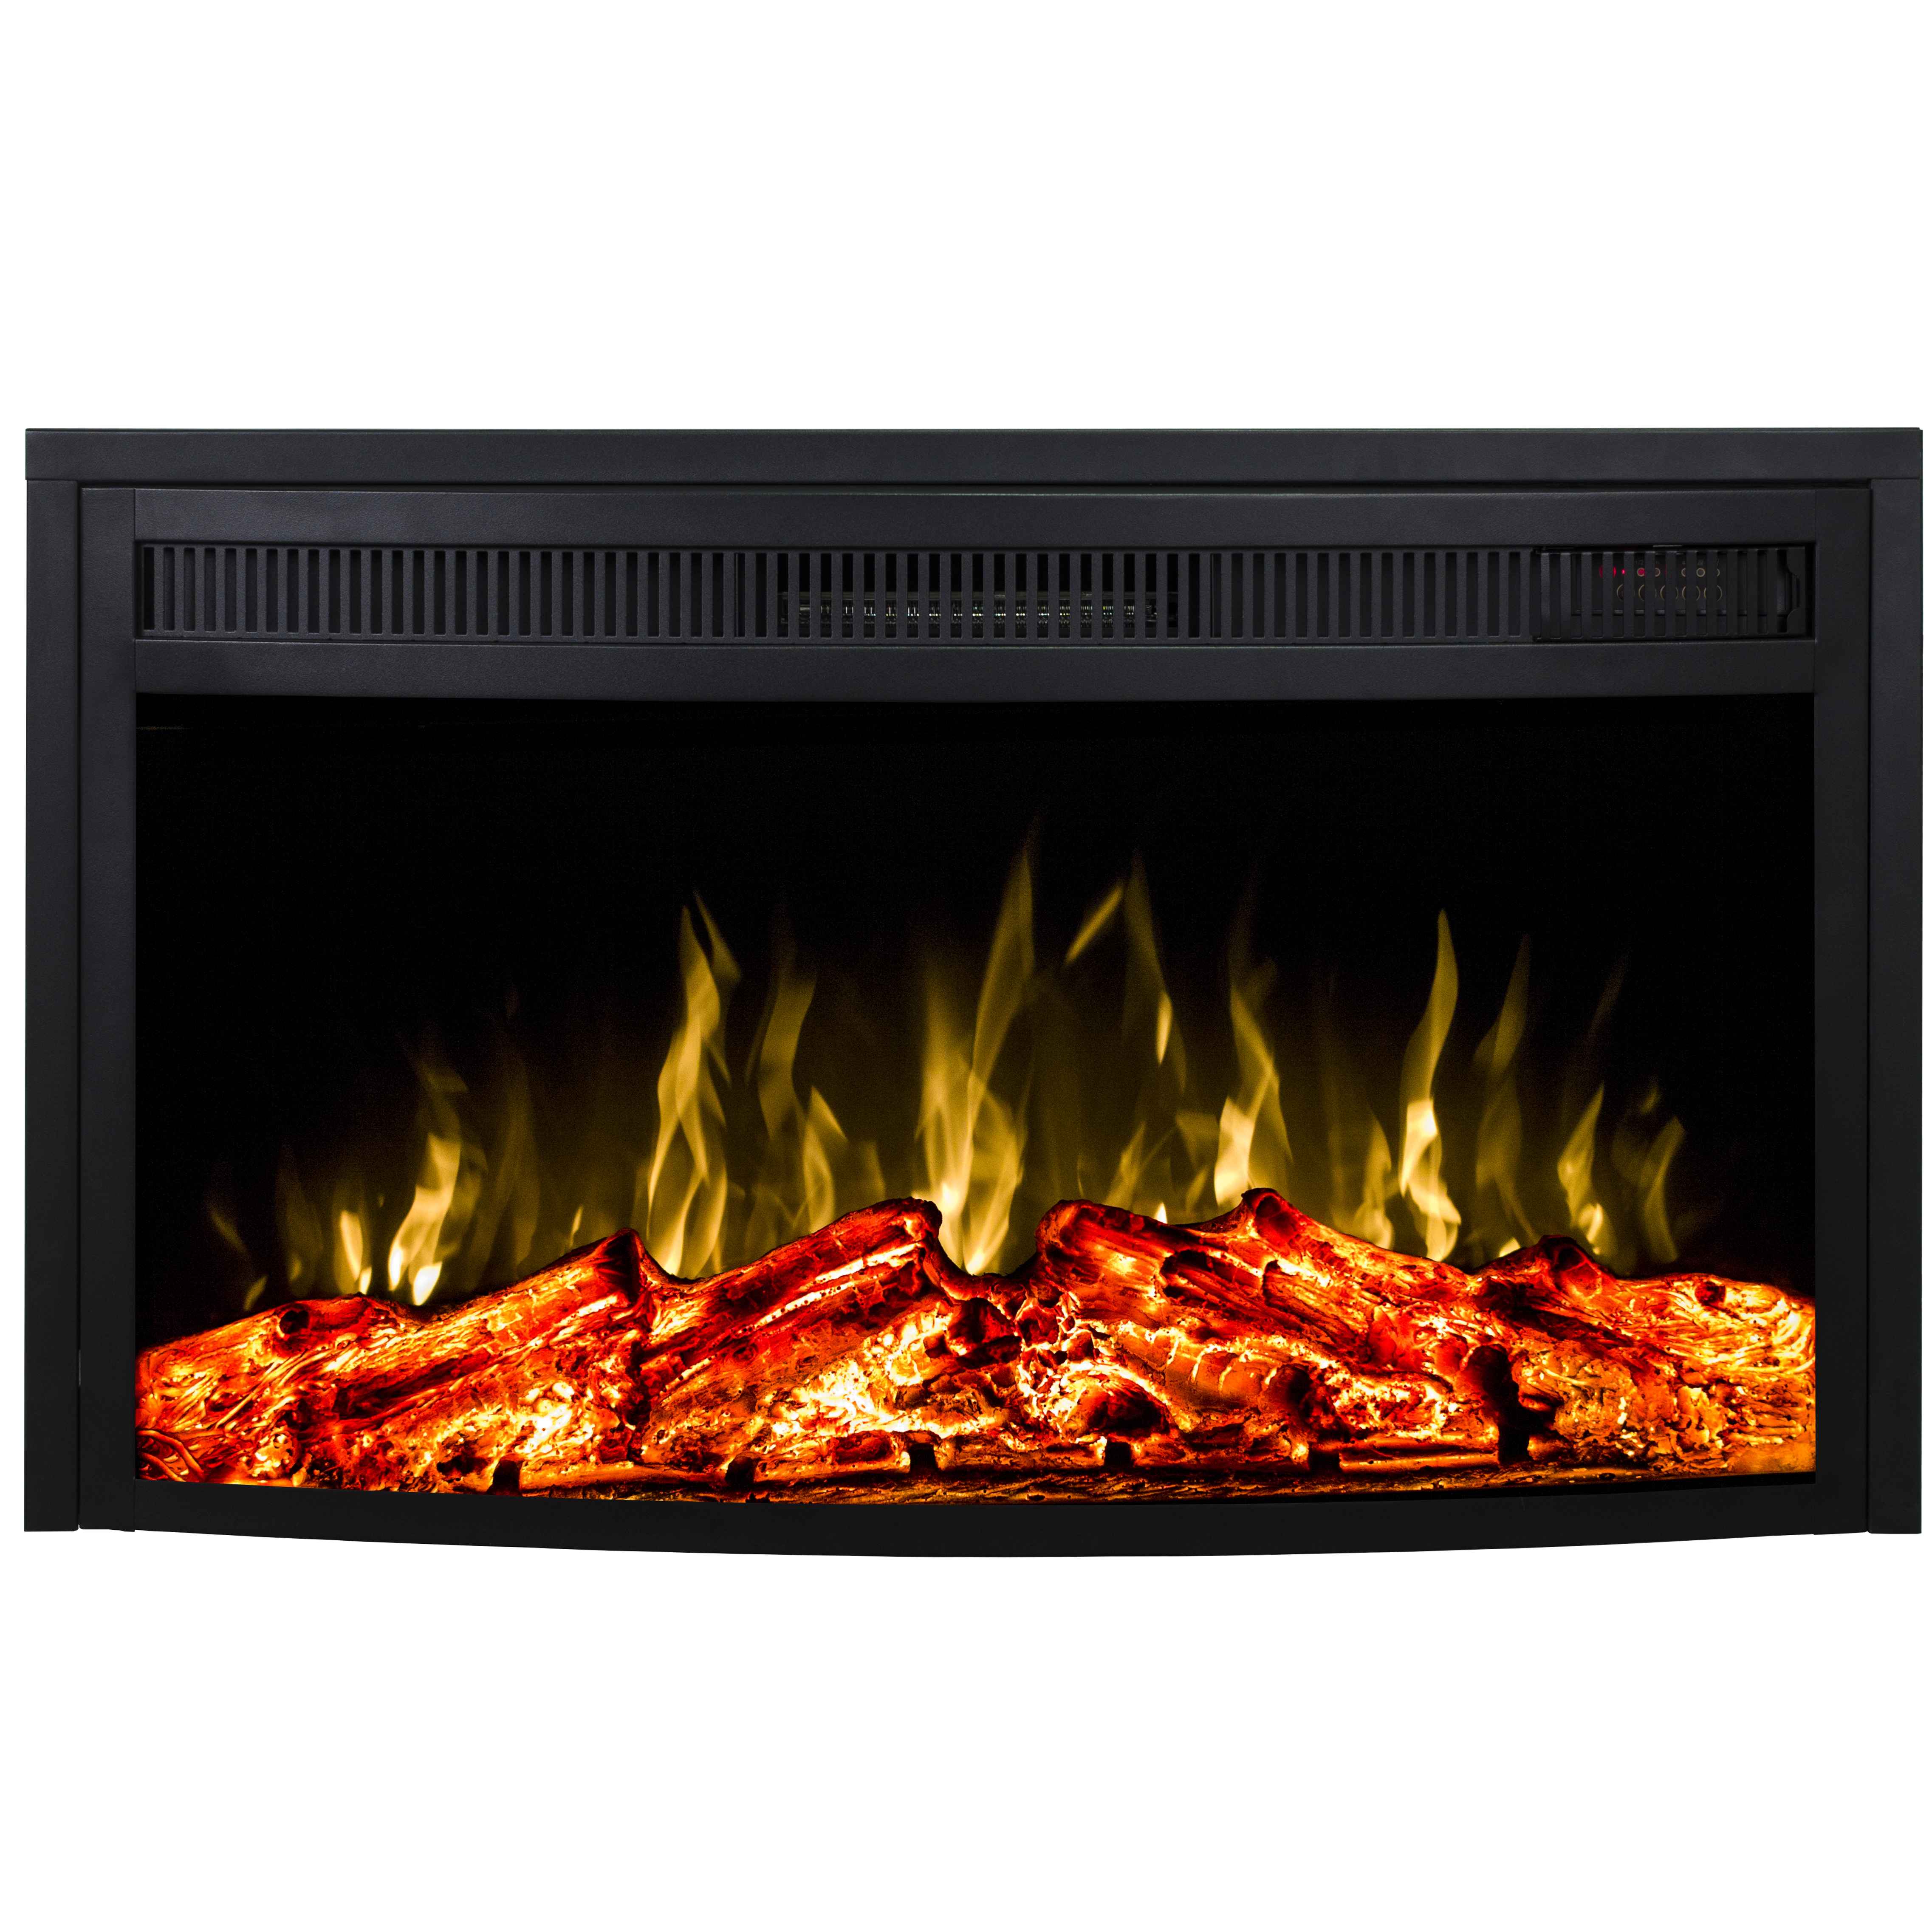 Regal Flame 26 Inch Curved Ventless, Can Electric Fireplaces Cause Cancer